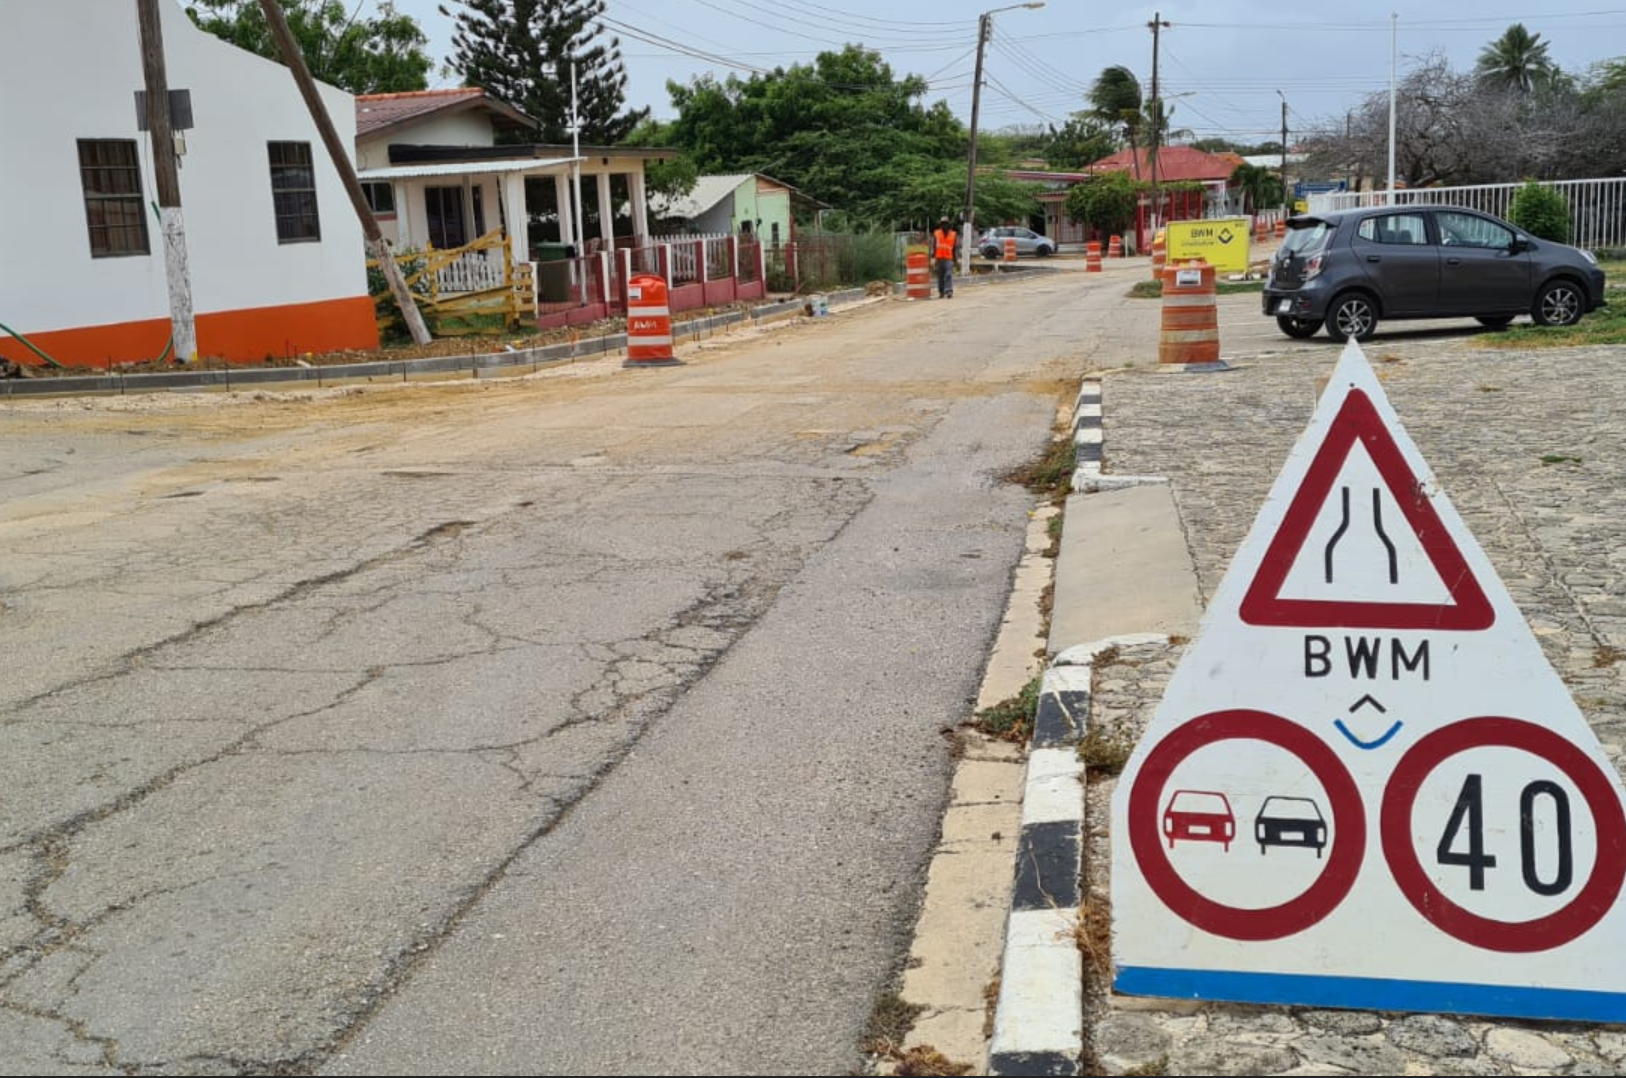 'Even More' Roads to be Renovated in Bonaire